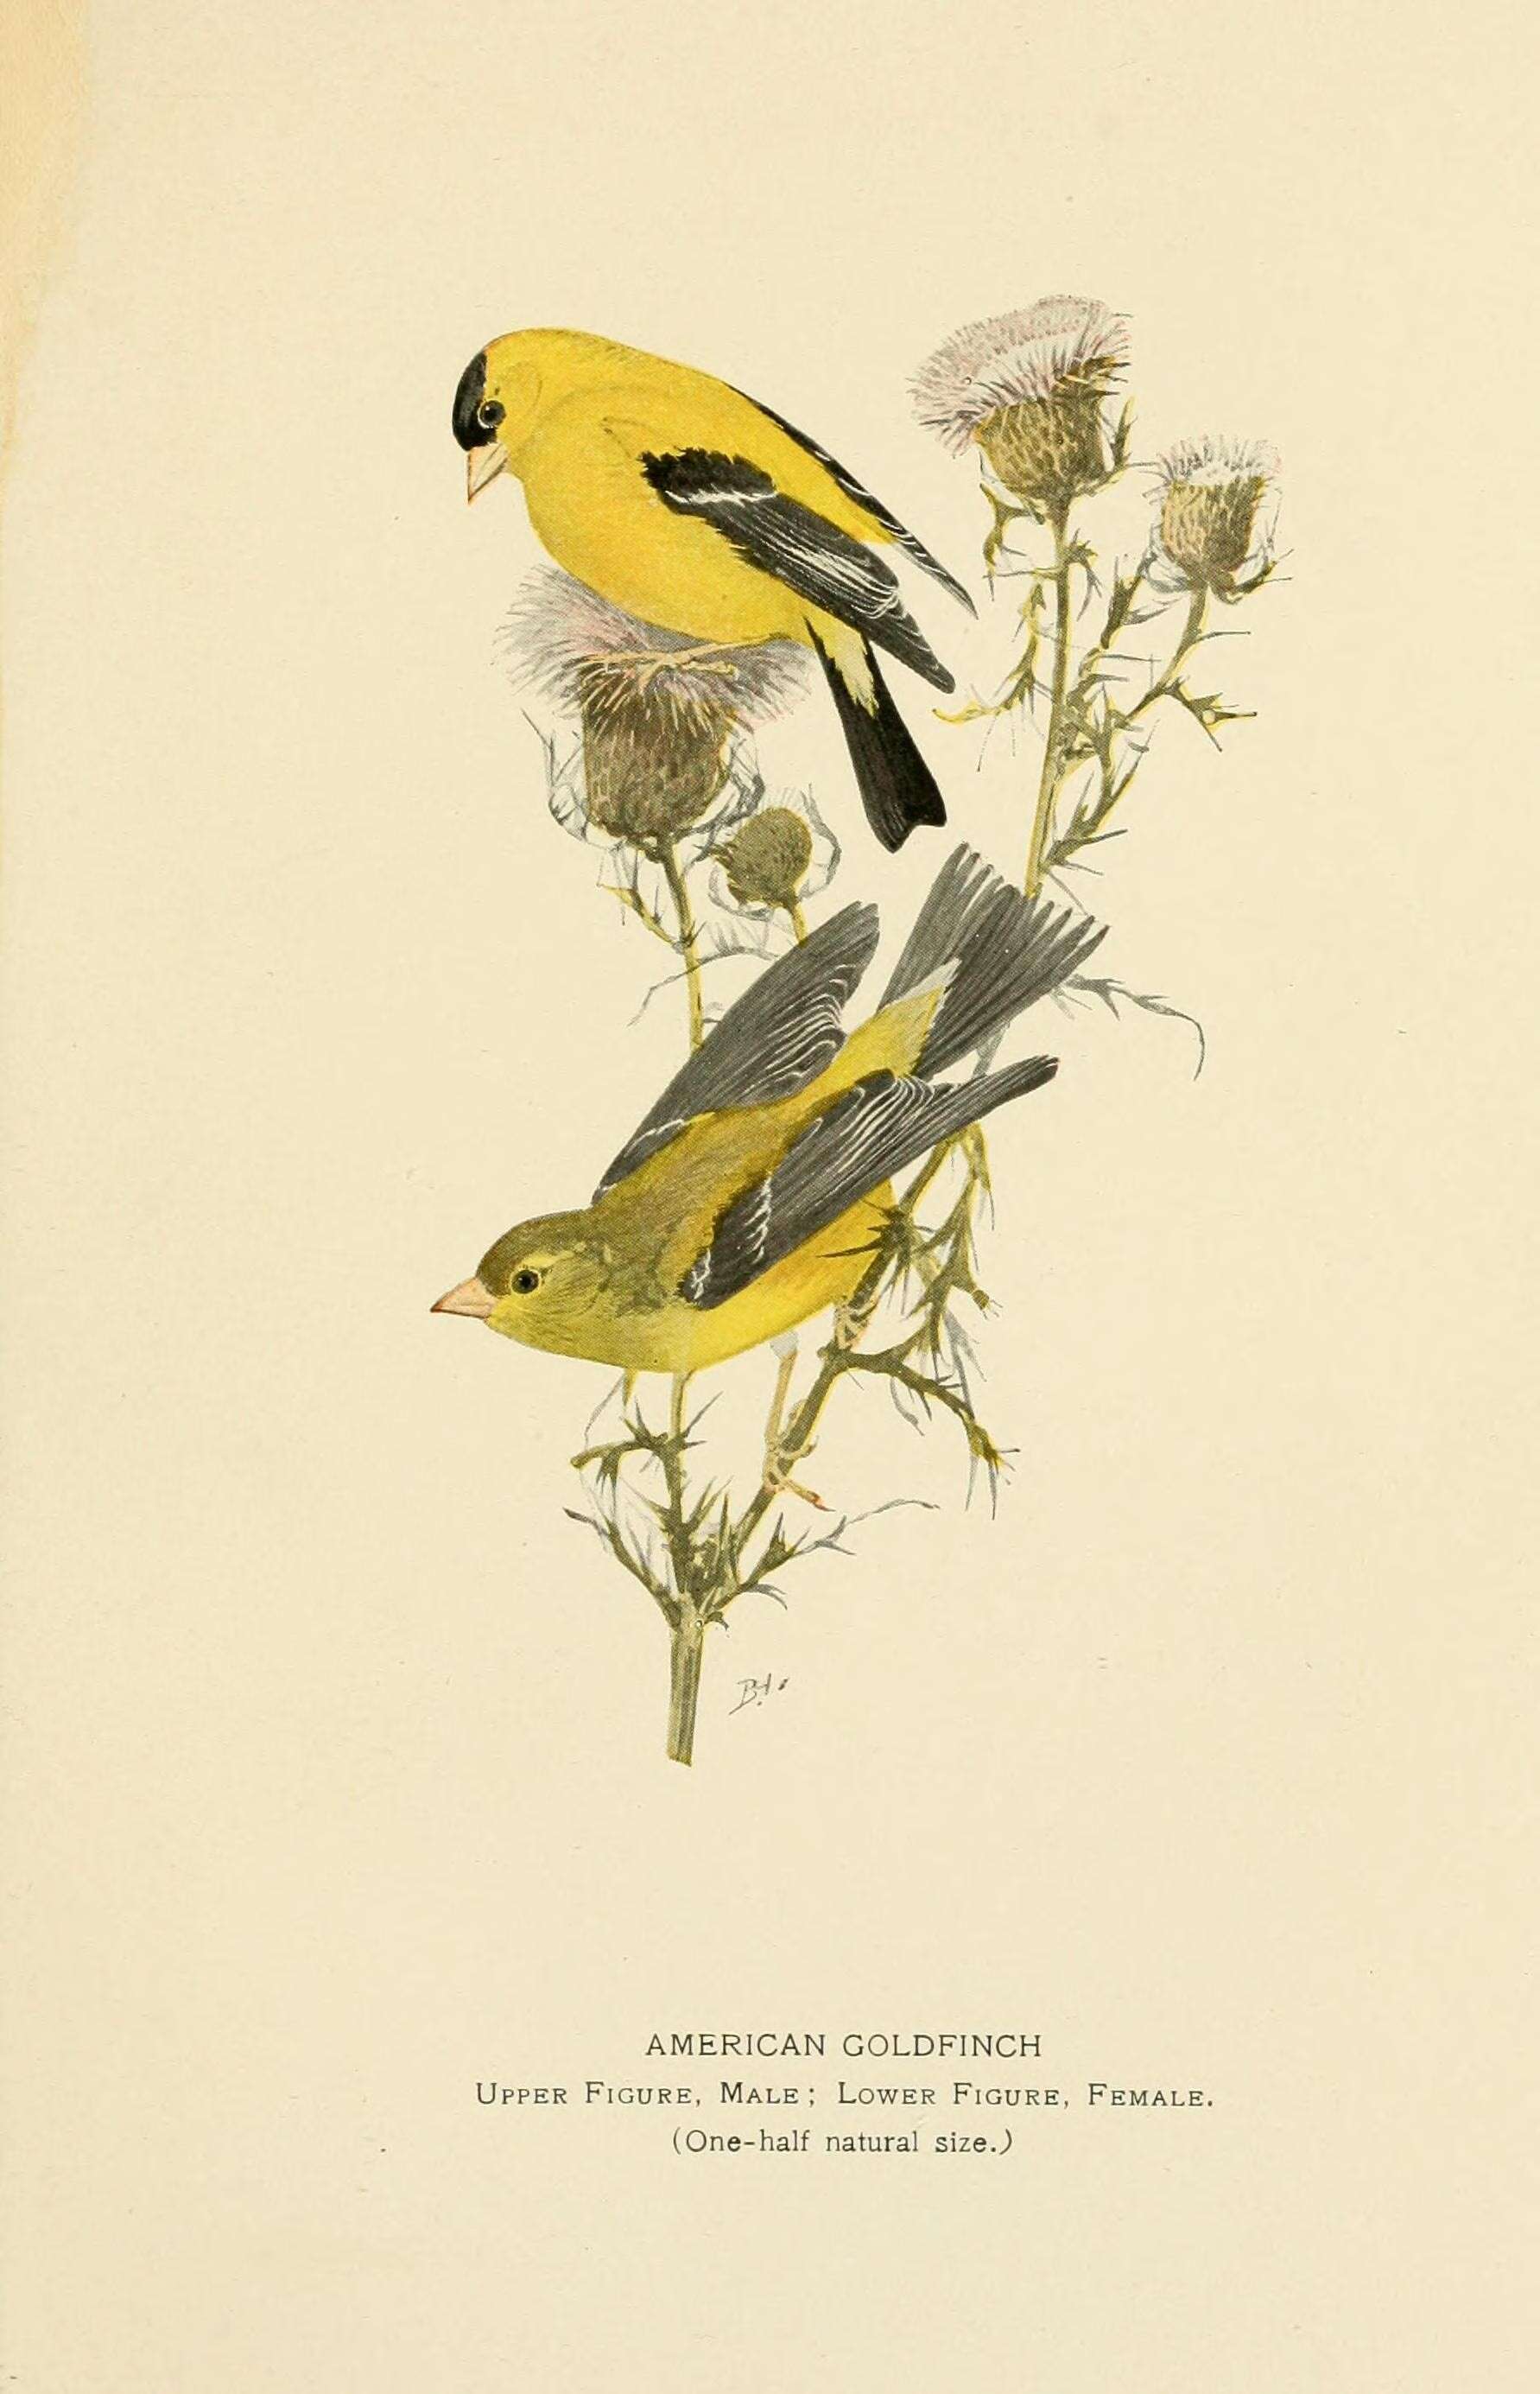 Image of American goldfinch